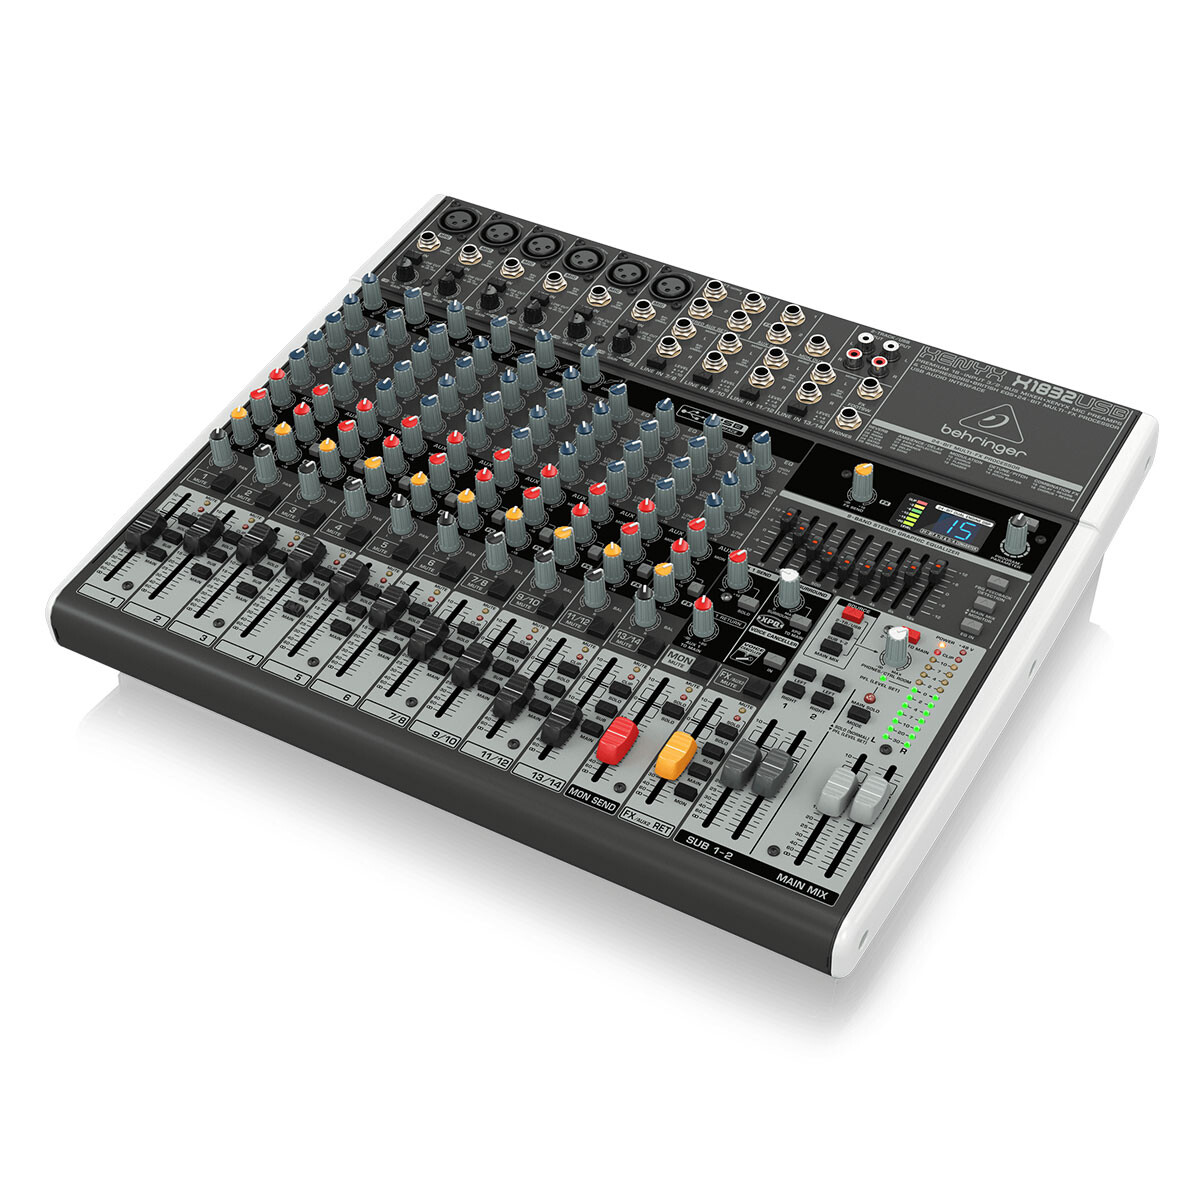 Consola Behringer X1832usb 18in 3/2 Bus Fx 